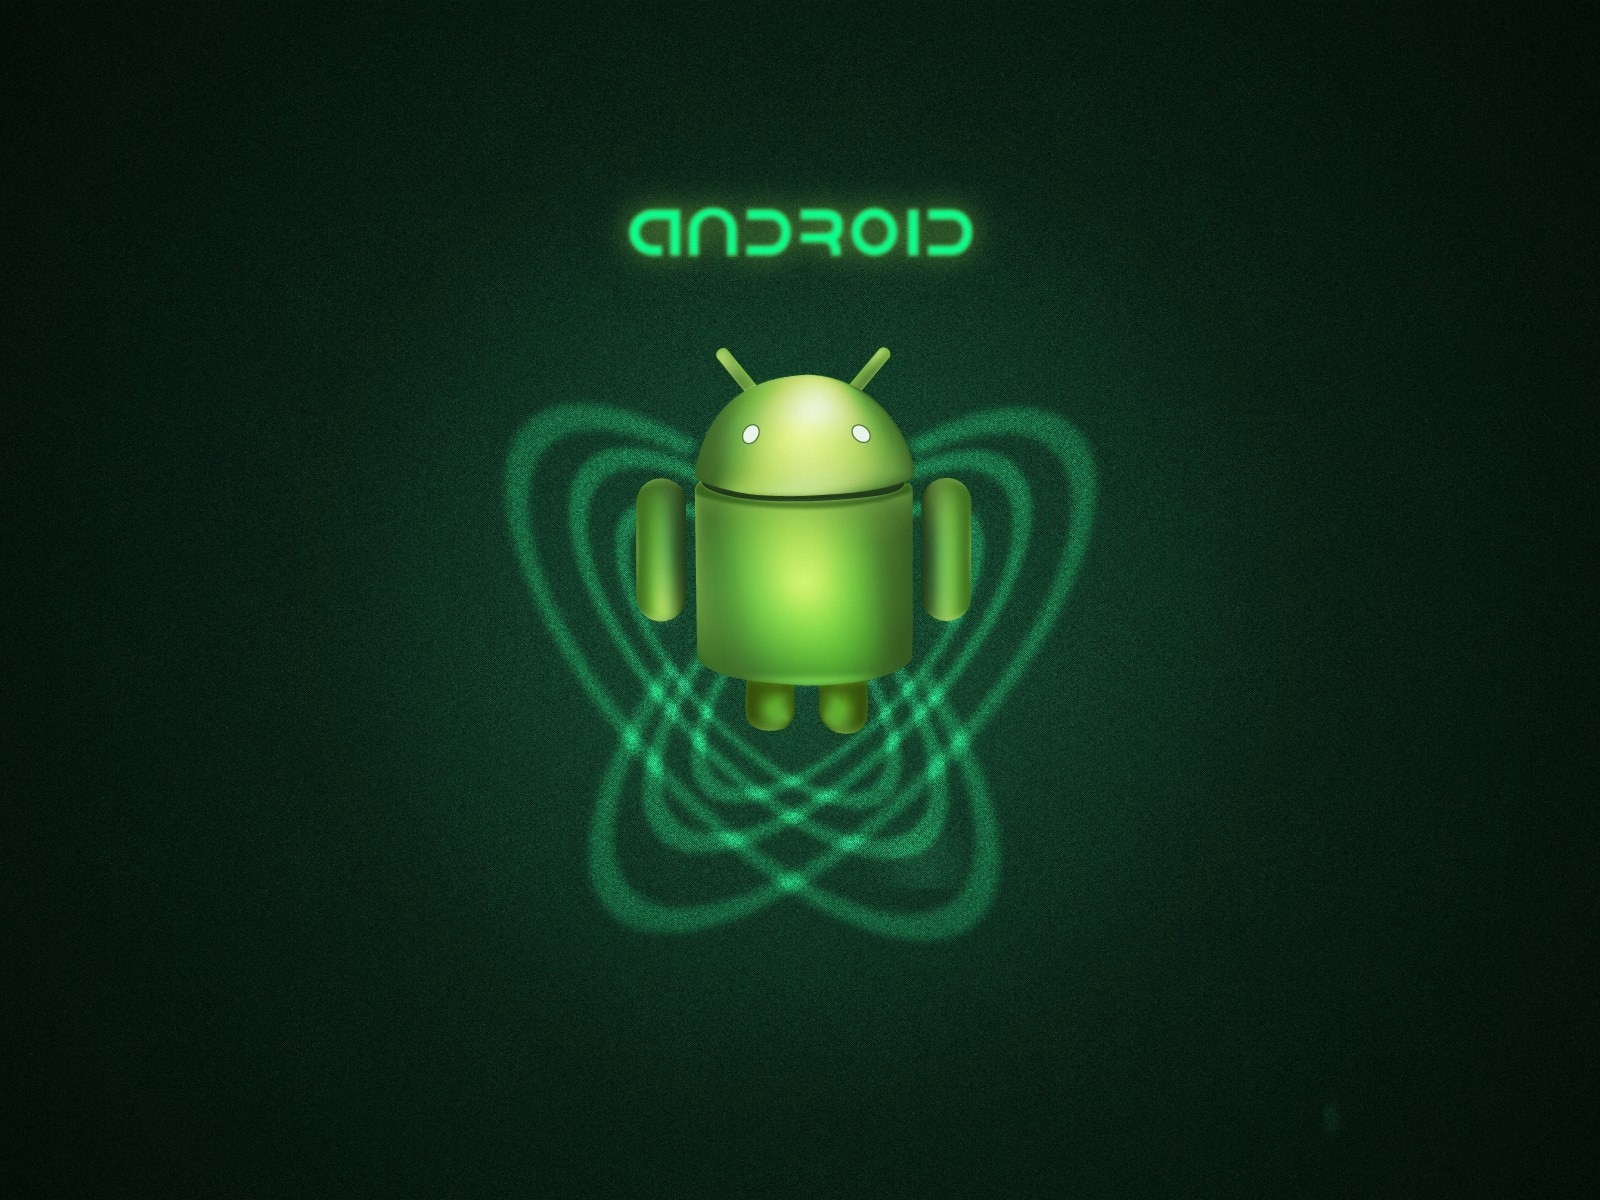 Android Mascot for 1600 x 1200 resolution